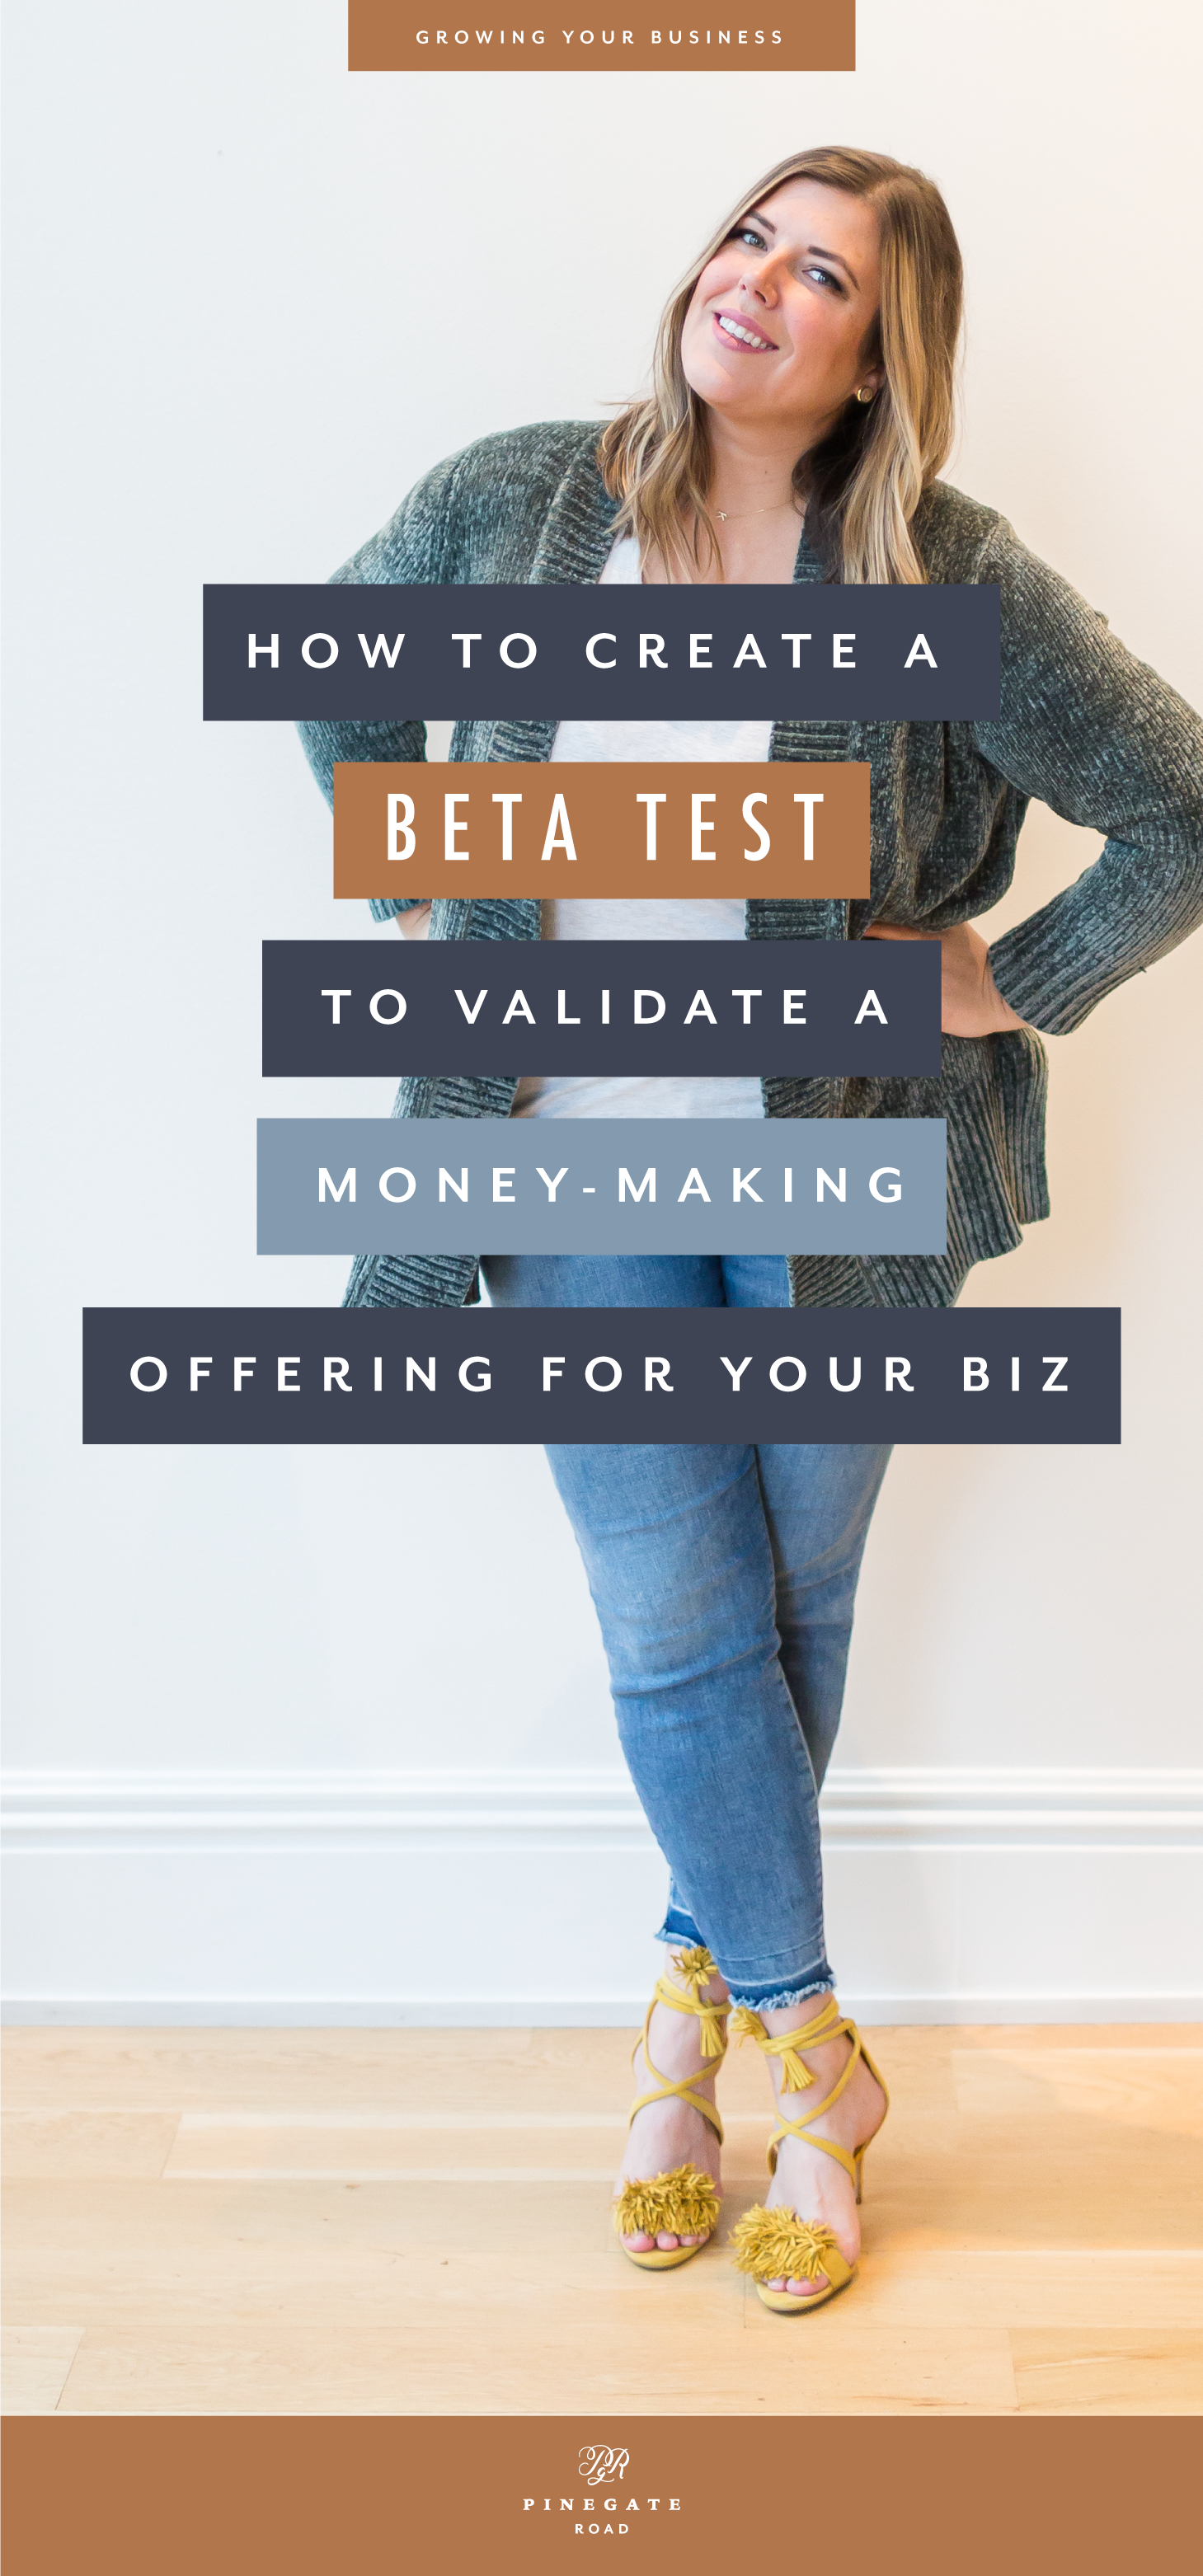 How to create a Beta Test to validate a money-making offering for your online business.